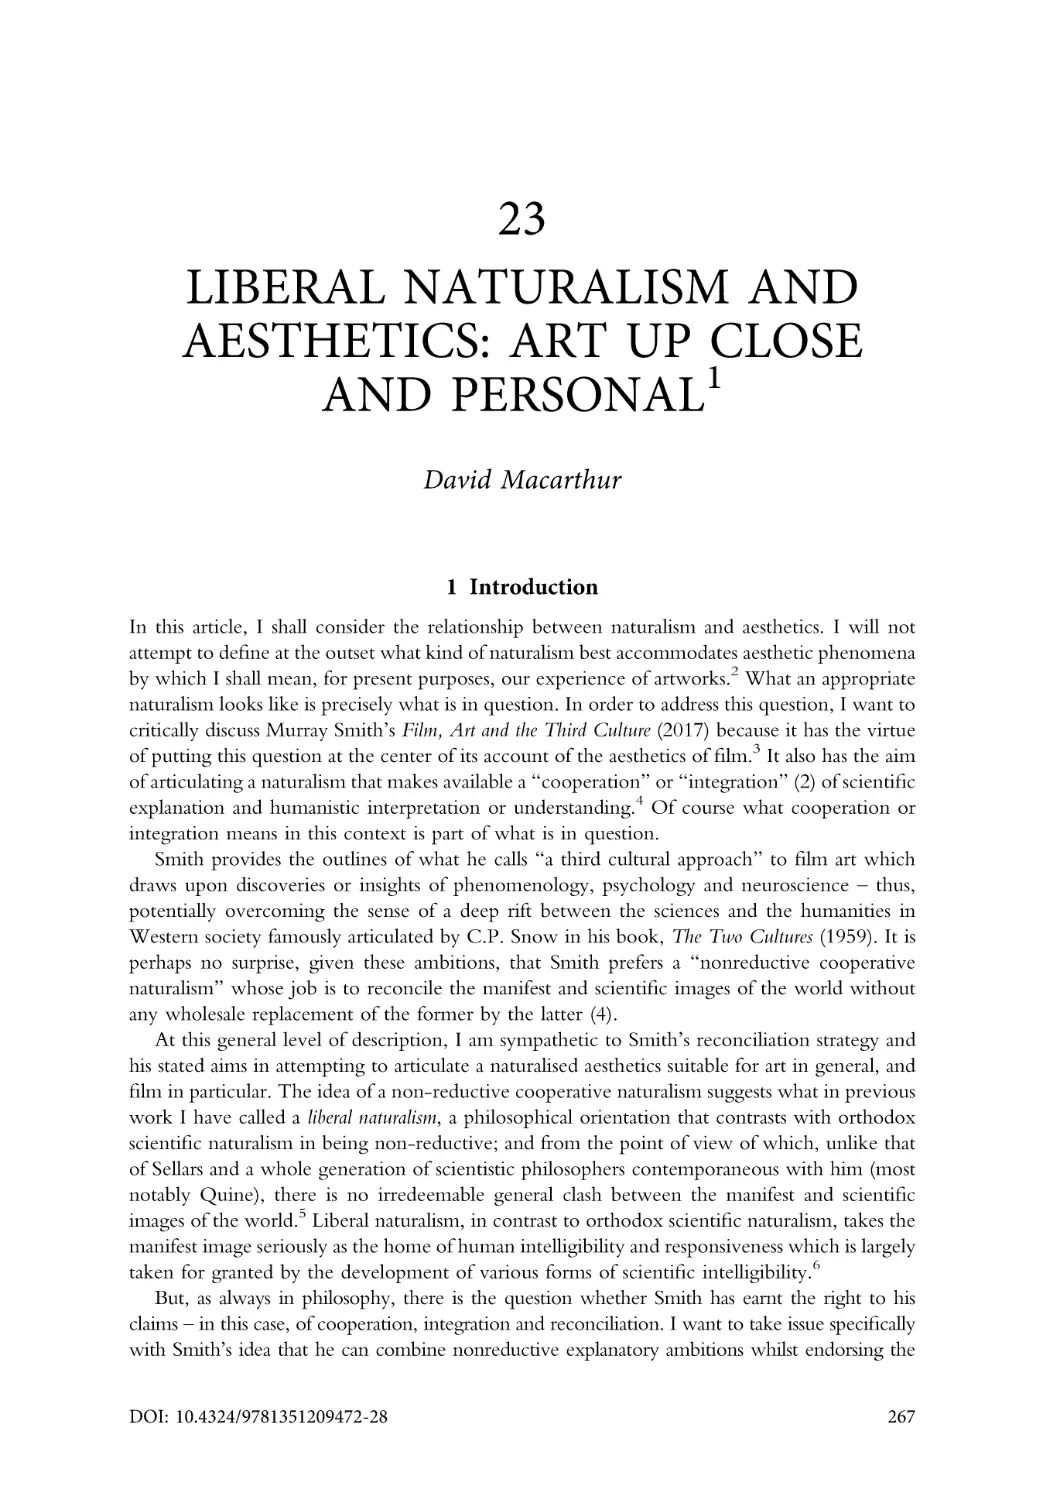 23. Liberal naturalism and aesthetics
1. Introduction